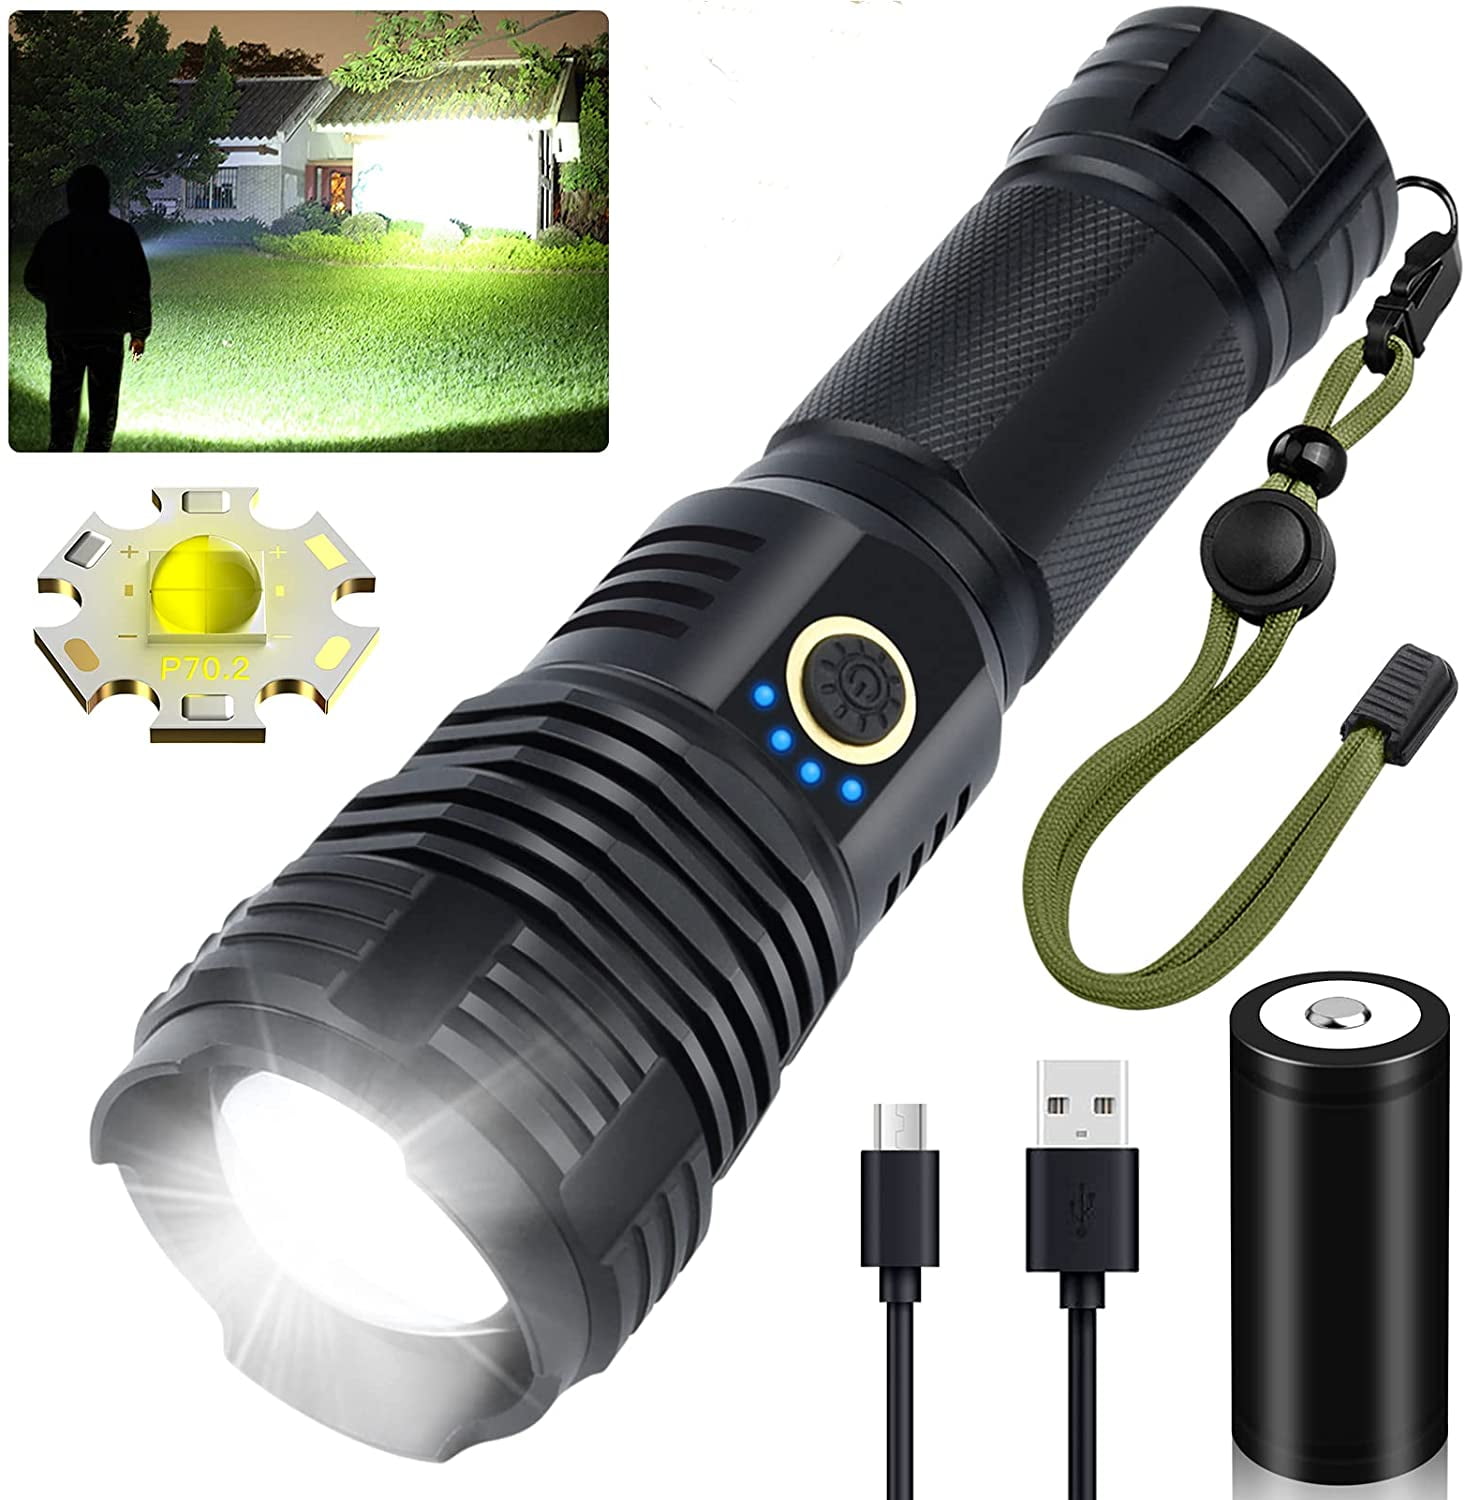 Flashlights High Lumens, 90000 Lumens Super Bright Tactical Flashlights, Xhp70.2 Zoomable Waterproof Light Modes for Camping, Hiking, Outdoor, Emergency - Walmart.com